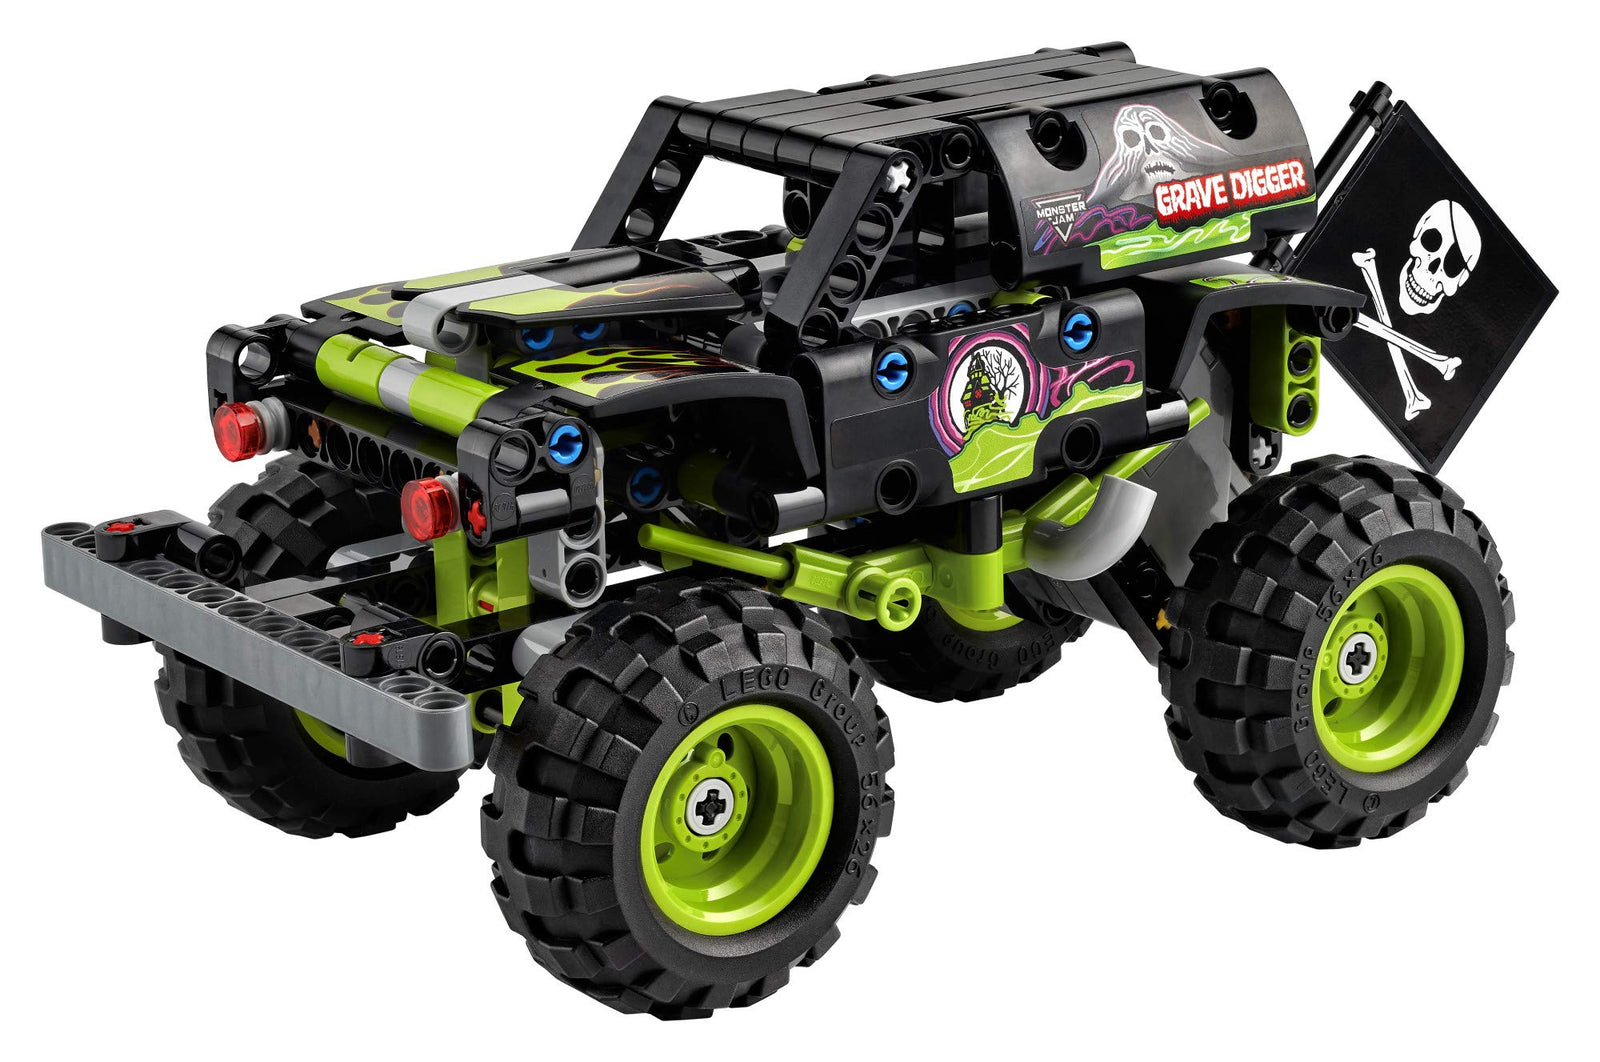 LEGO Technic Monster Jam Grave Digger 42118 Model Building Kit for Boys and Girls Who Love Monster Truck Toys, New 2021 (212 Pieces)